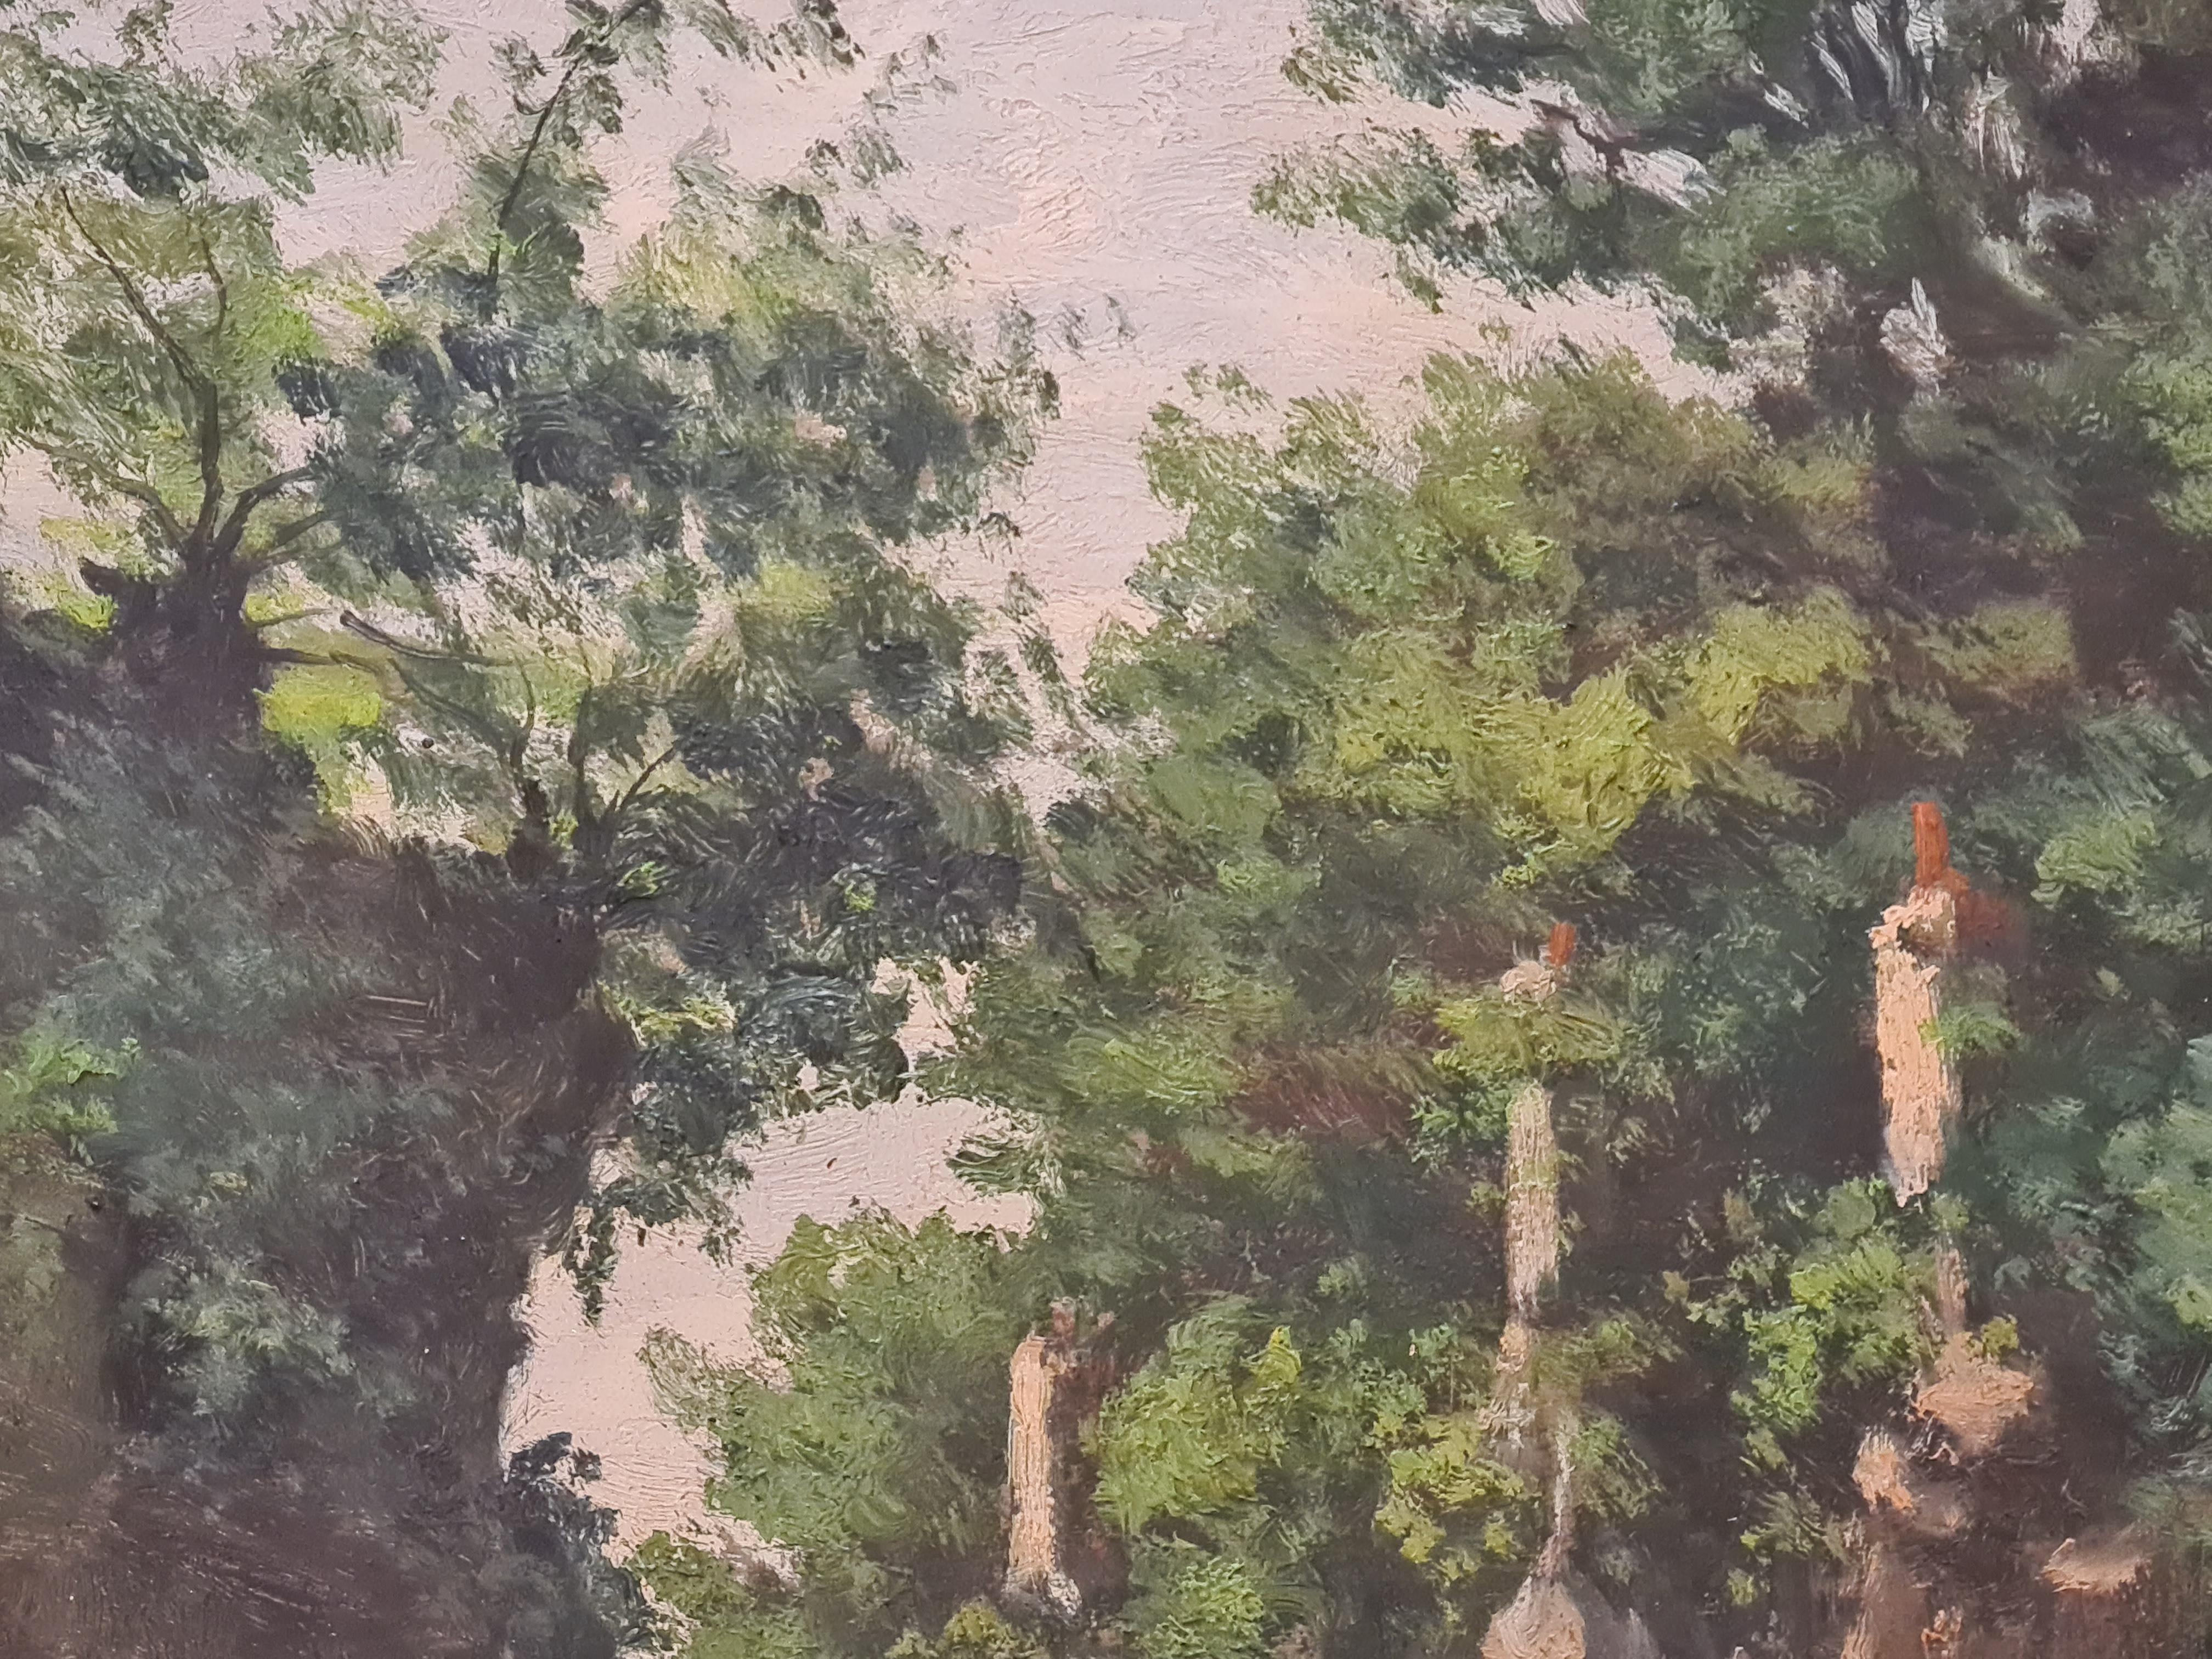 Le Puits, The Water Well Amidst Romantic Ruins - Barbizon School Painting by L. Masson